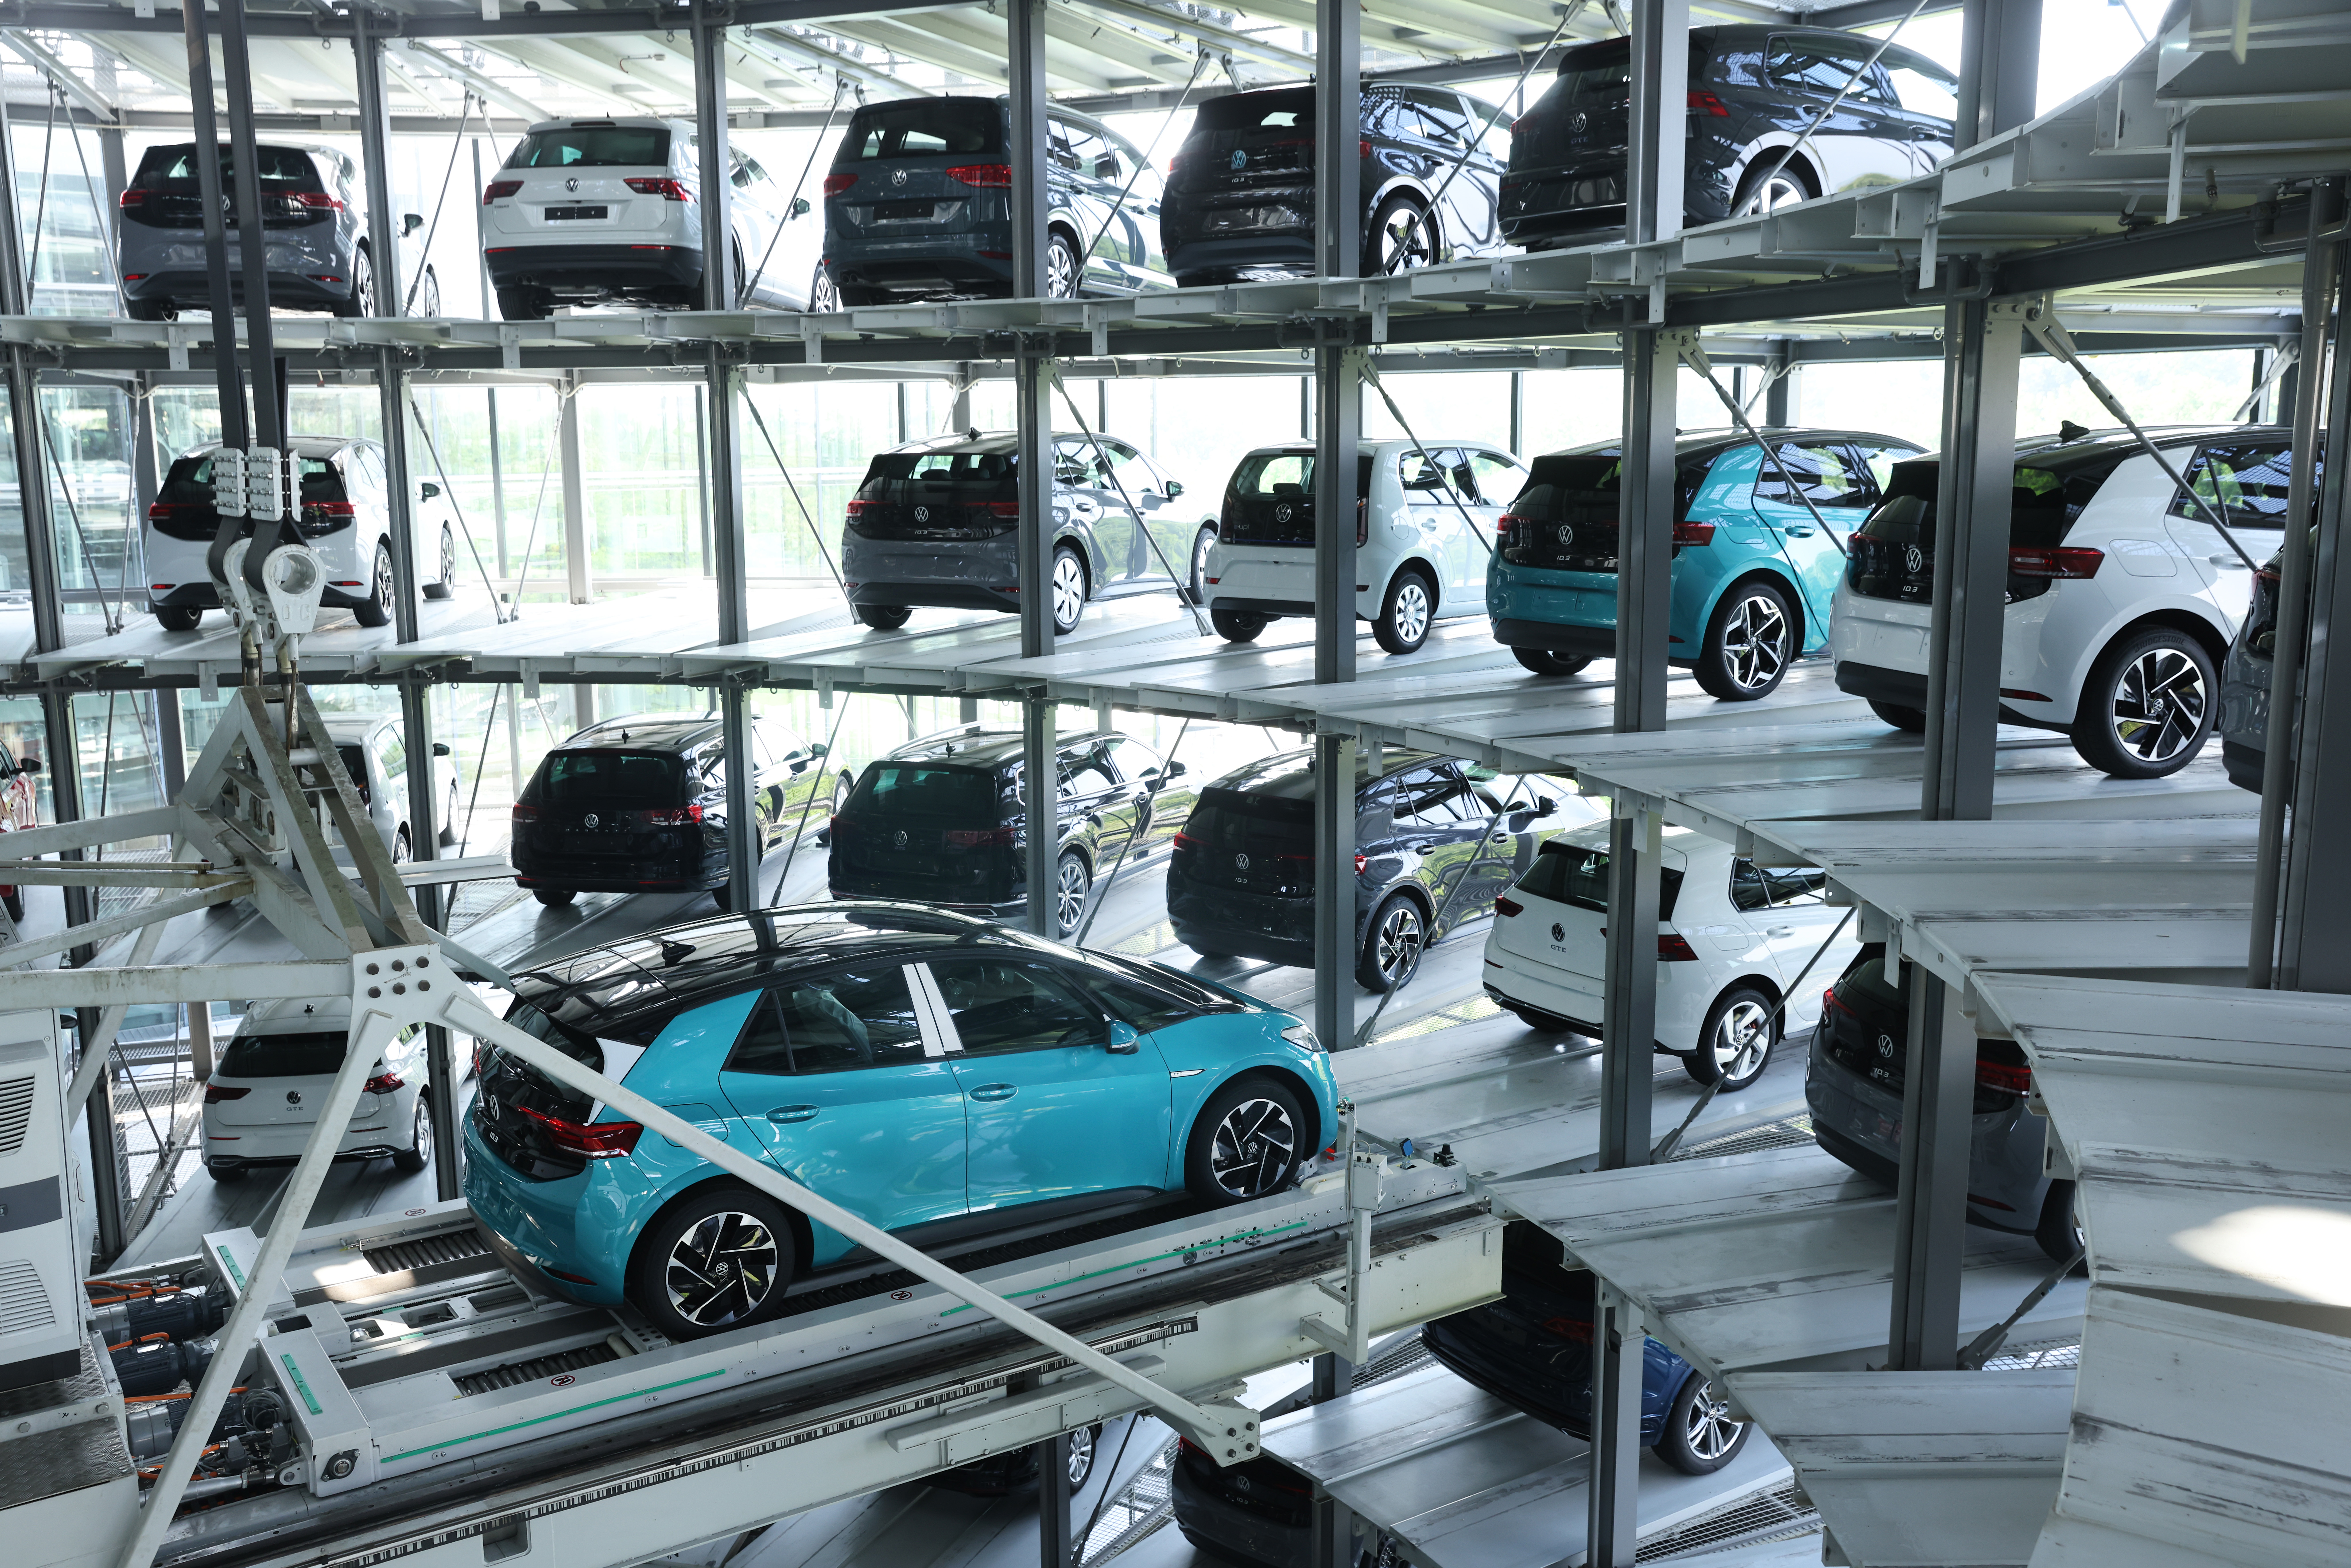 Volkswagen ID.3 electric cars in a storage tower.